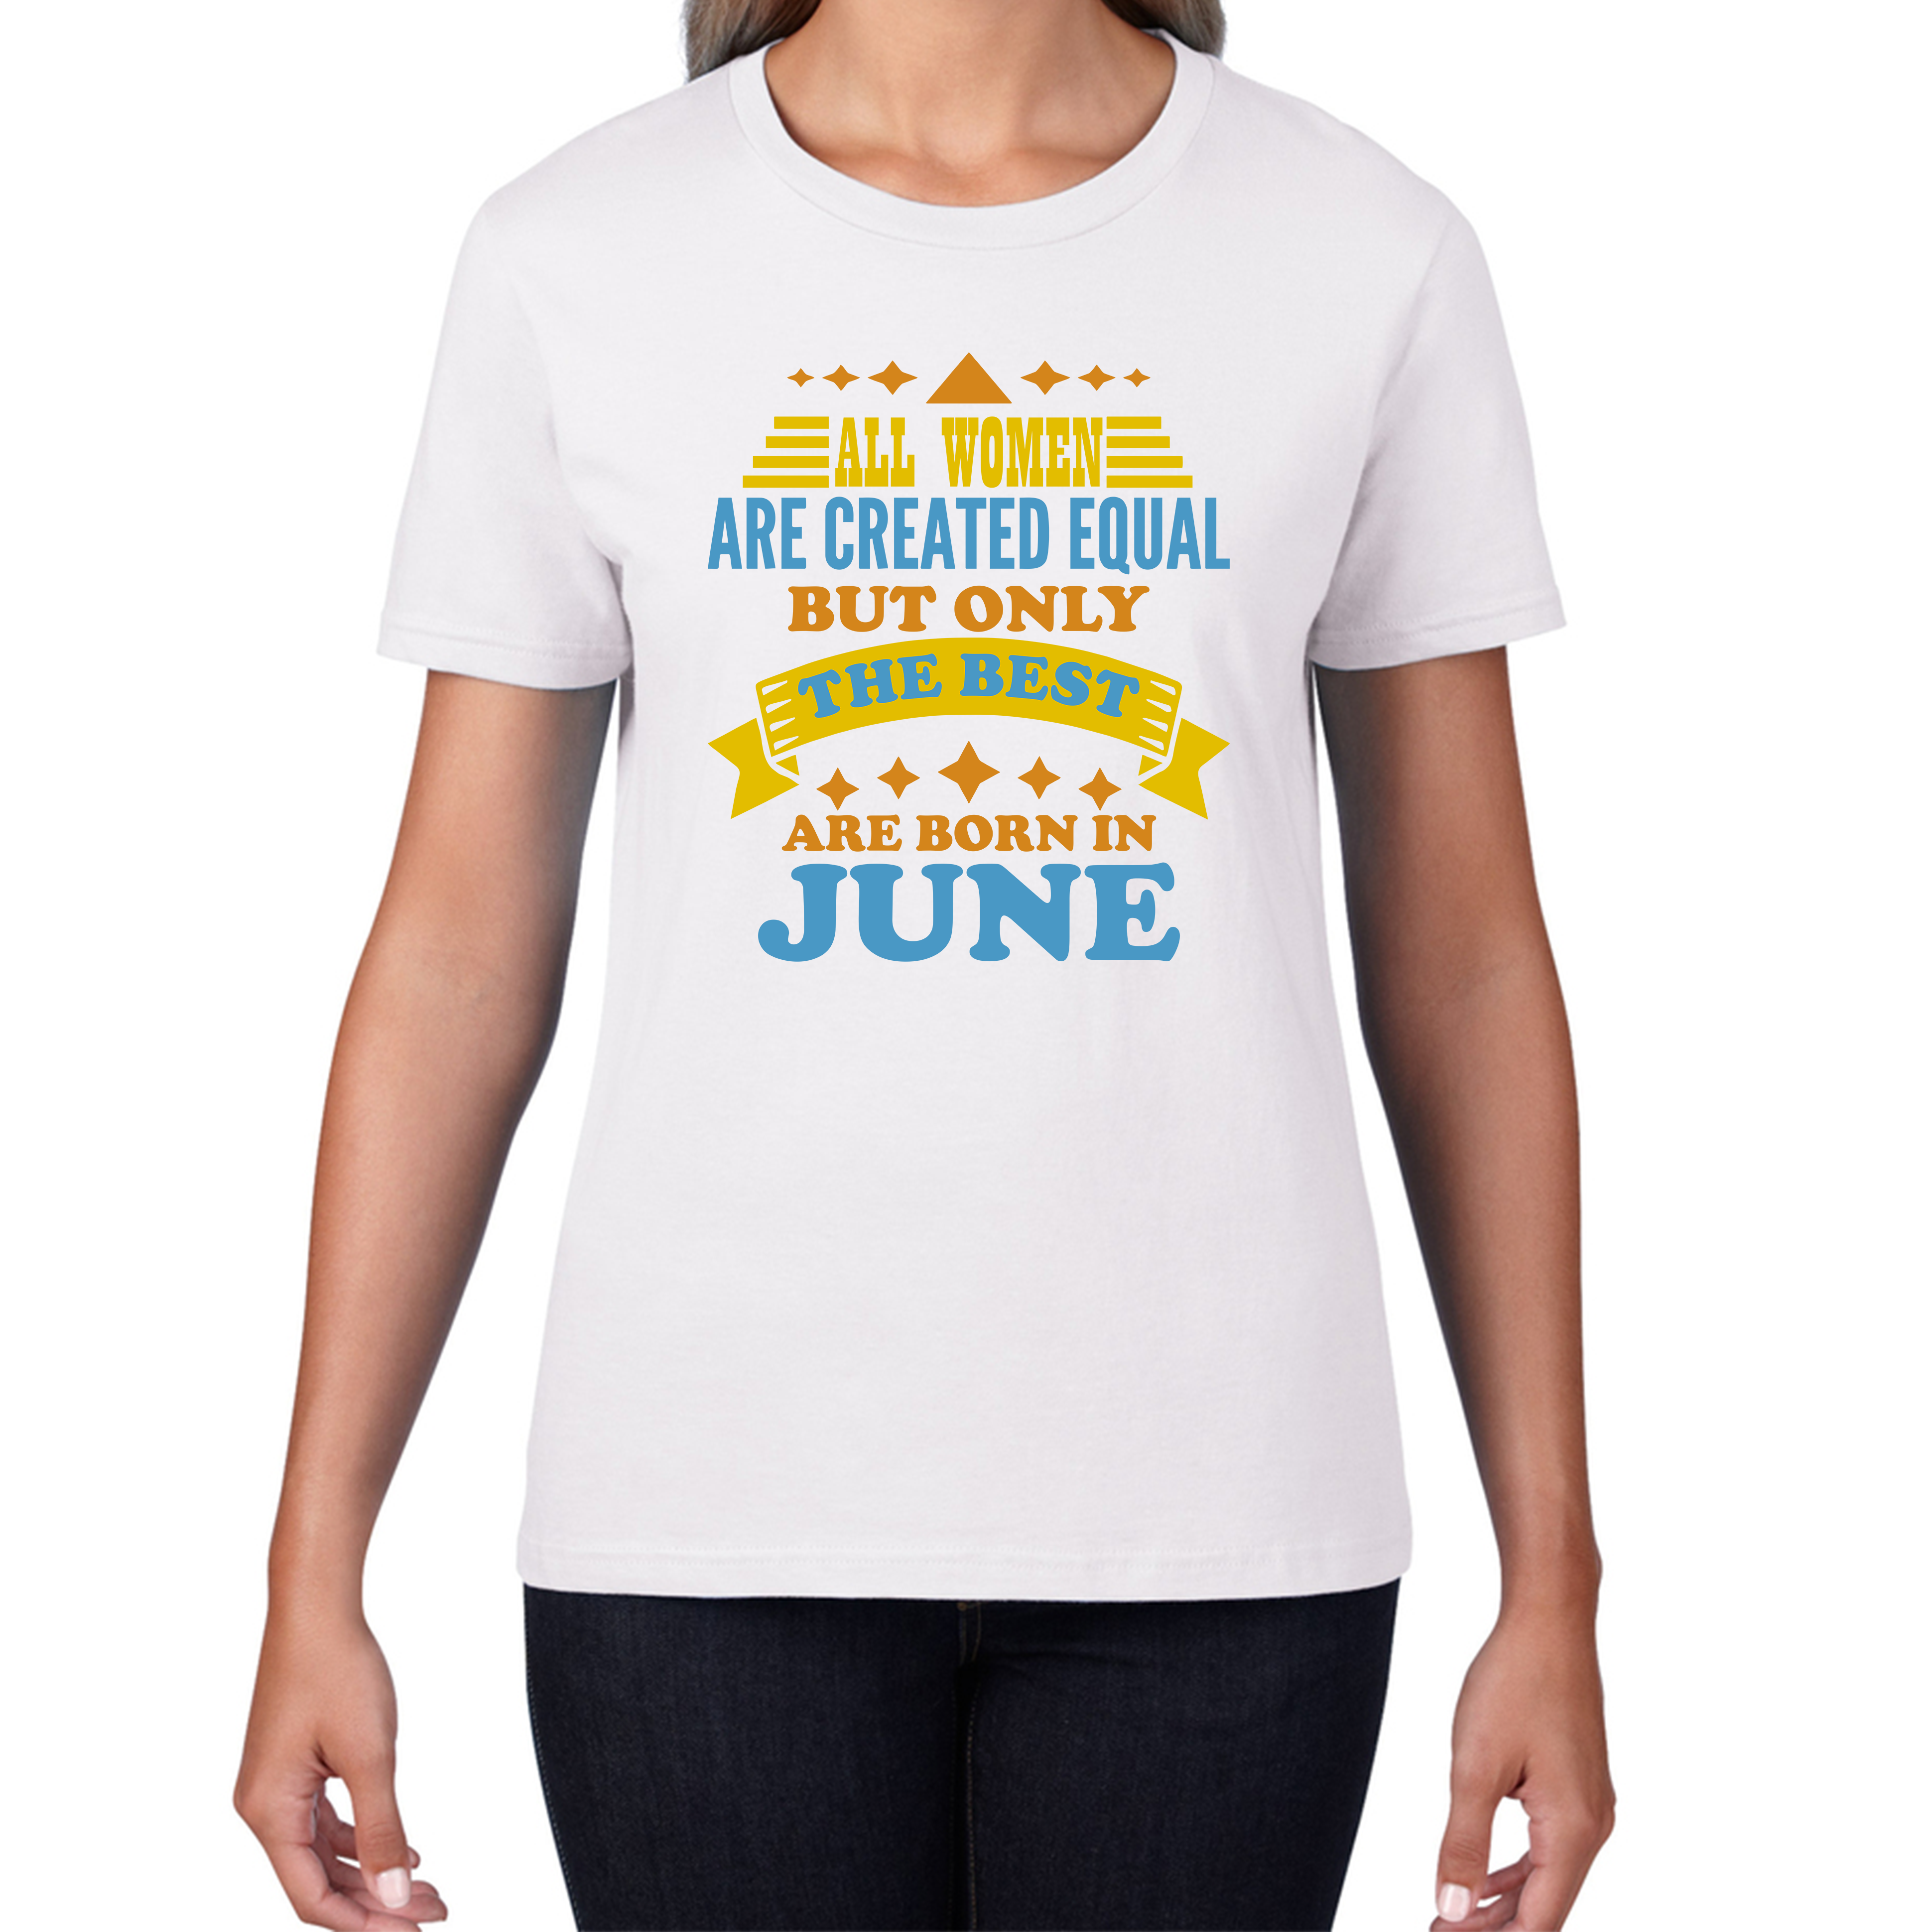 All Women Are Created Equal But Only The Best Are Born In June Funny Birthday Quote Womens Tee Top